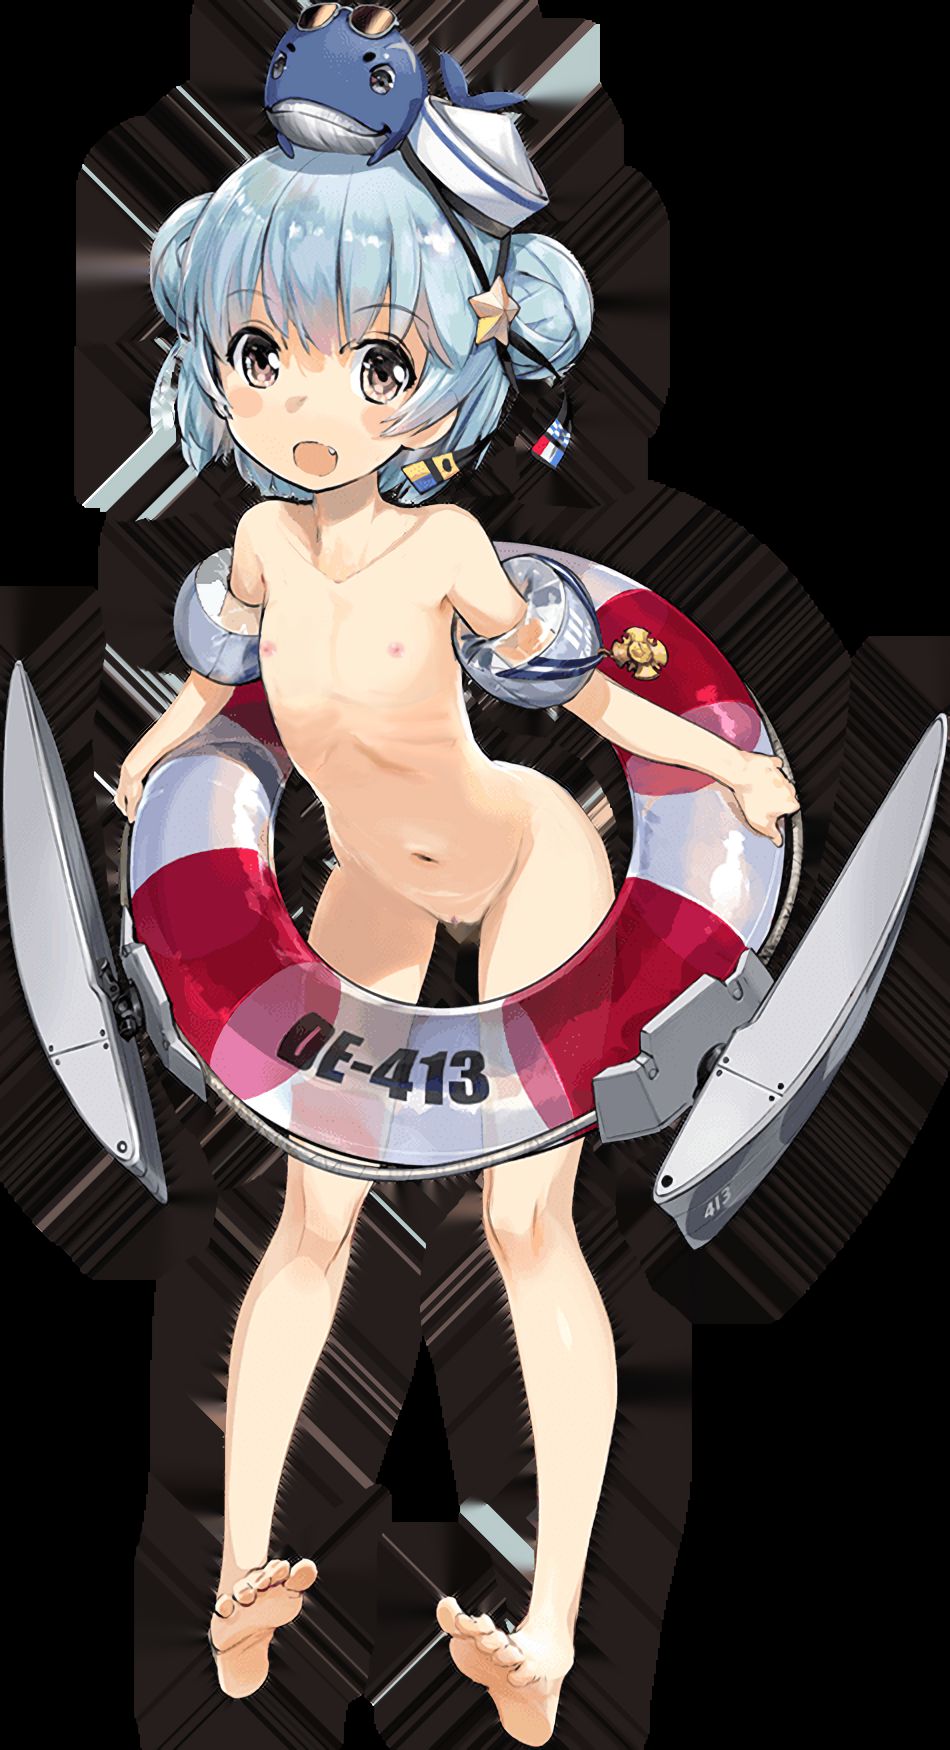 [Erocola Character Material] PNG background transparent erotic image material, such as anime characters Part 263 5